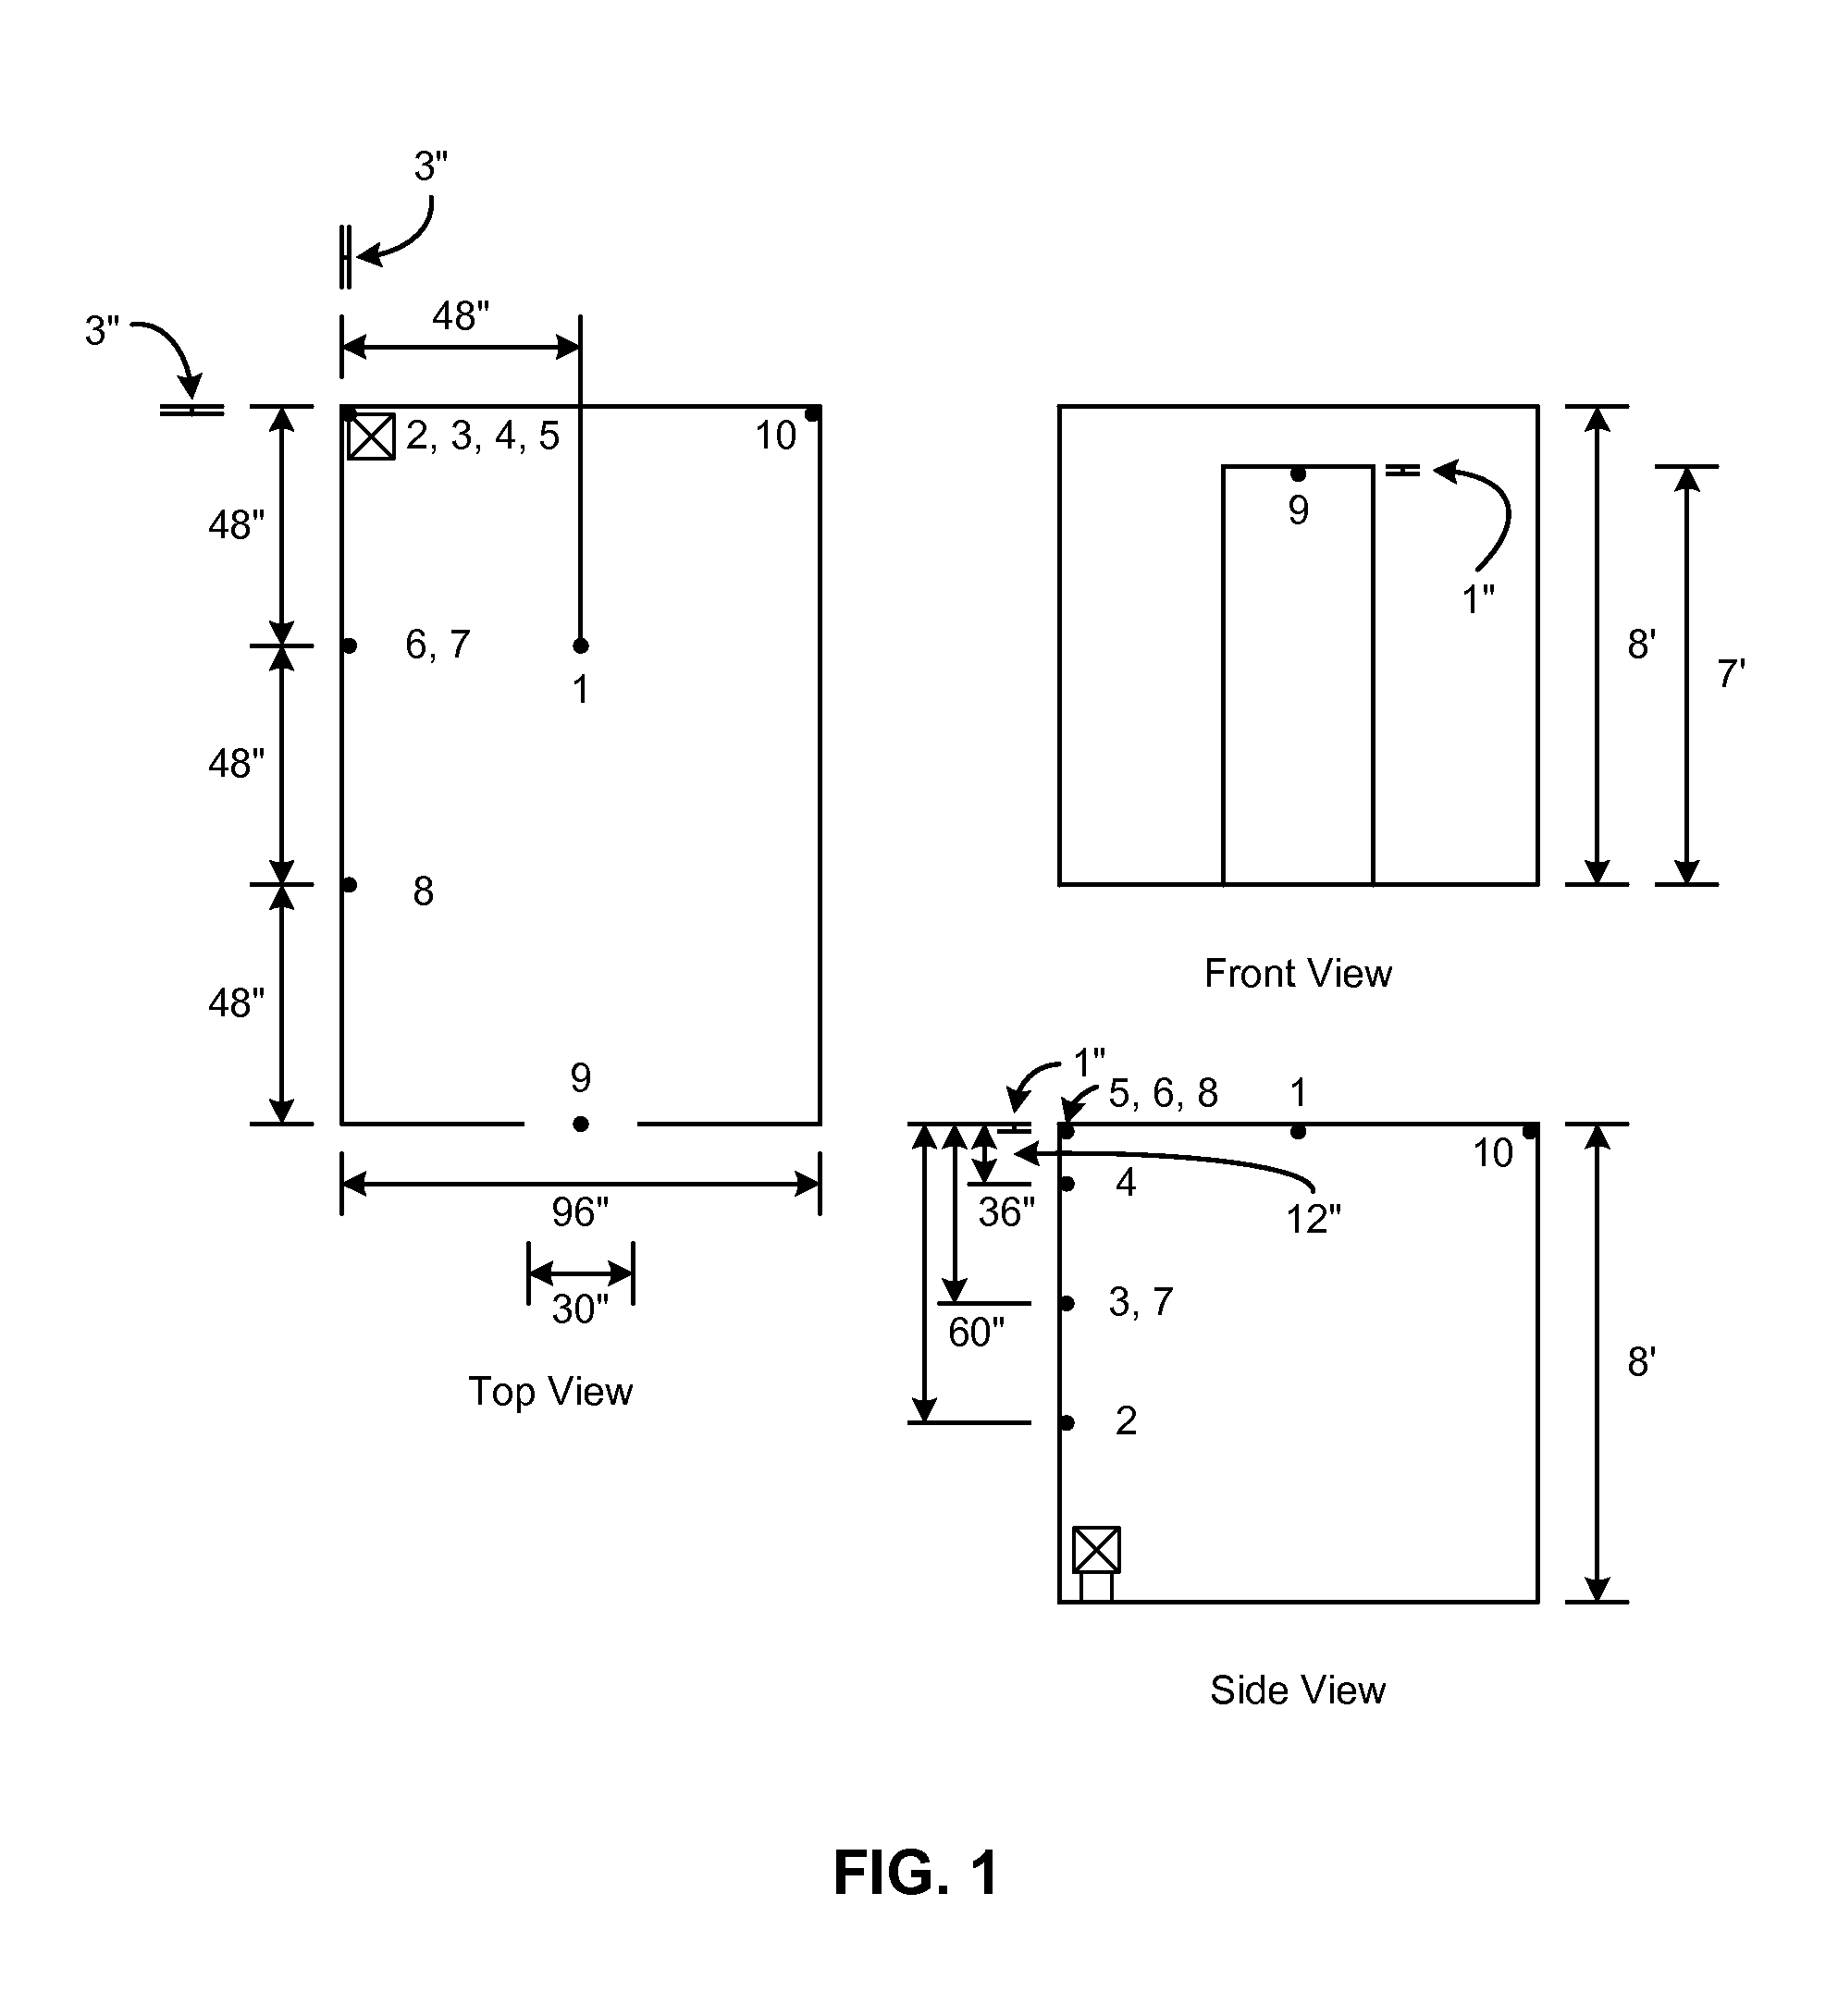 Polyurethane foam compositions and process for making same